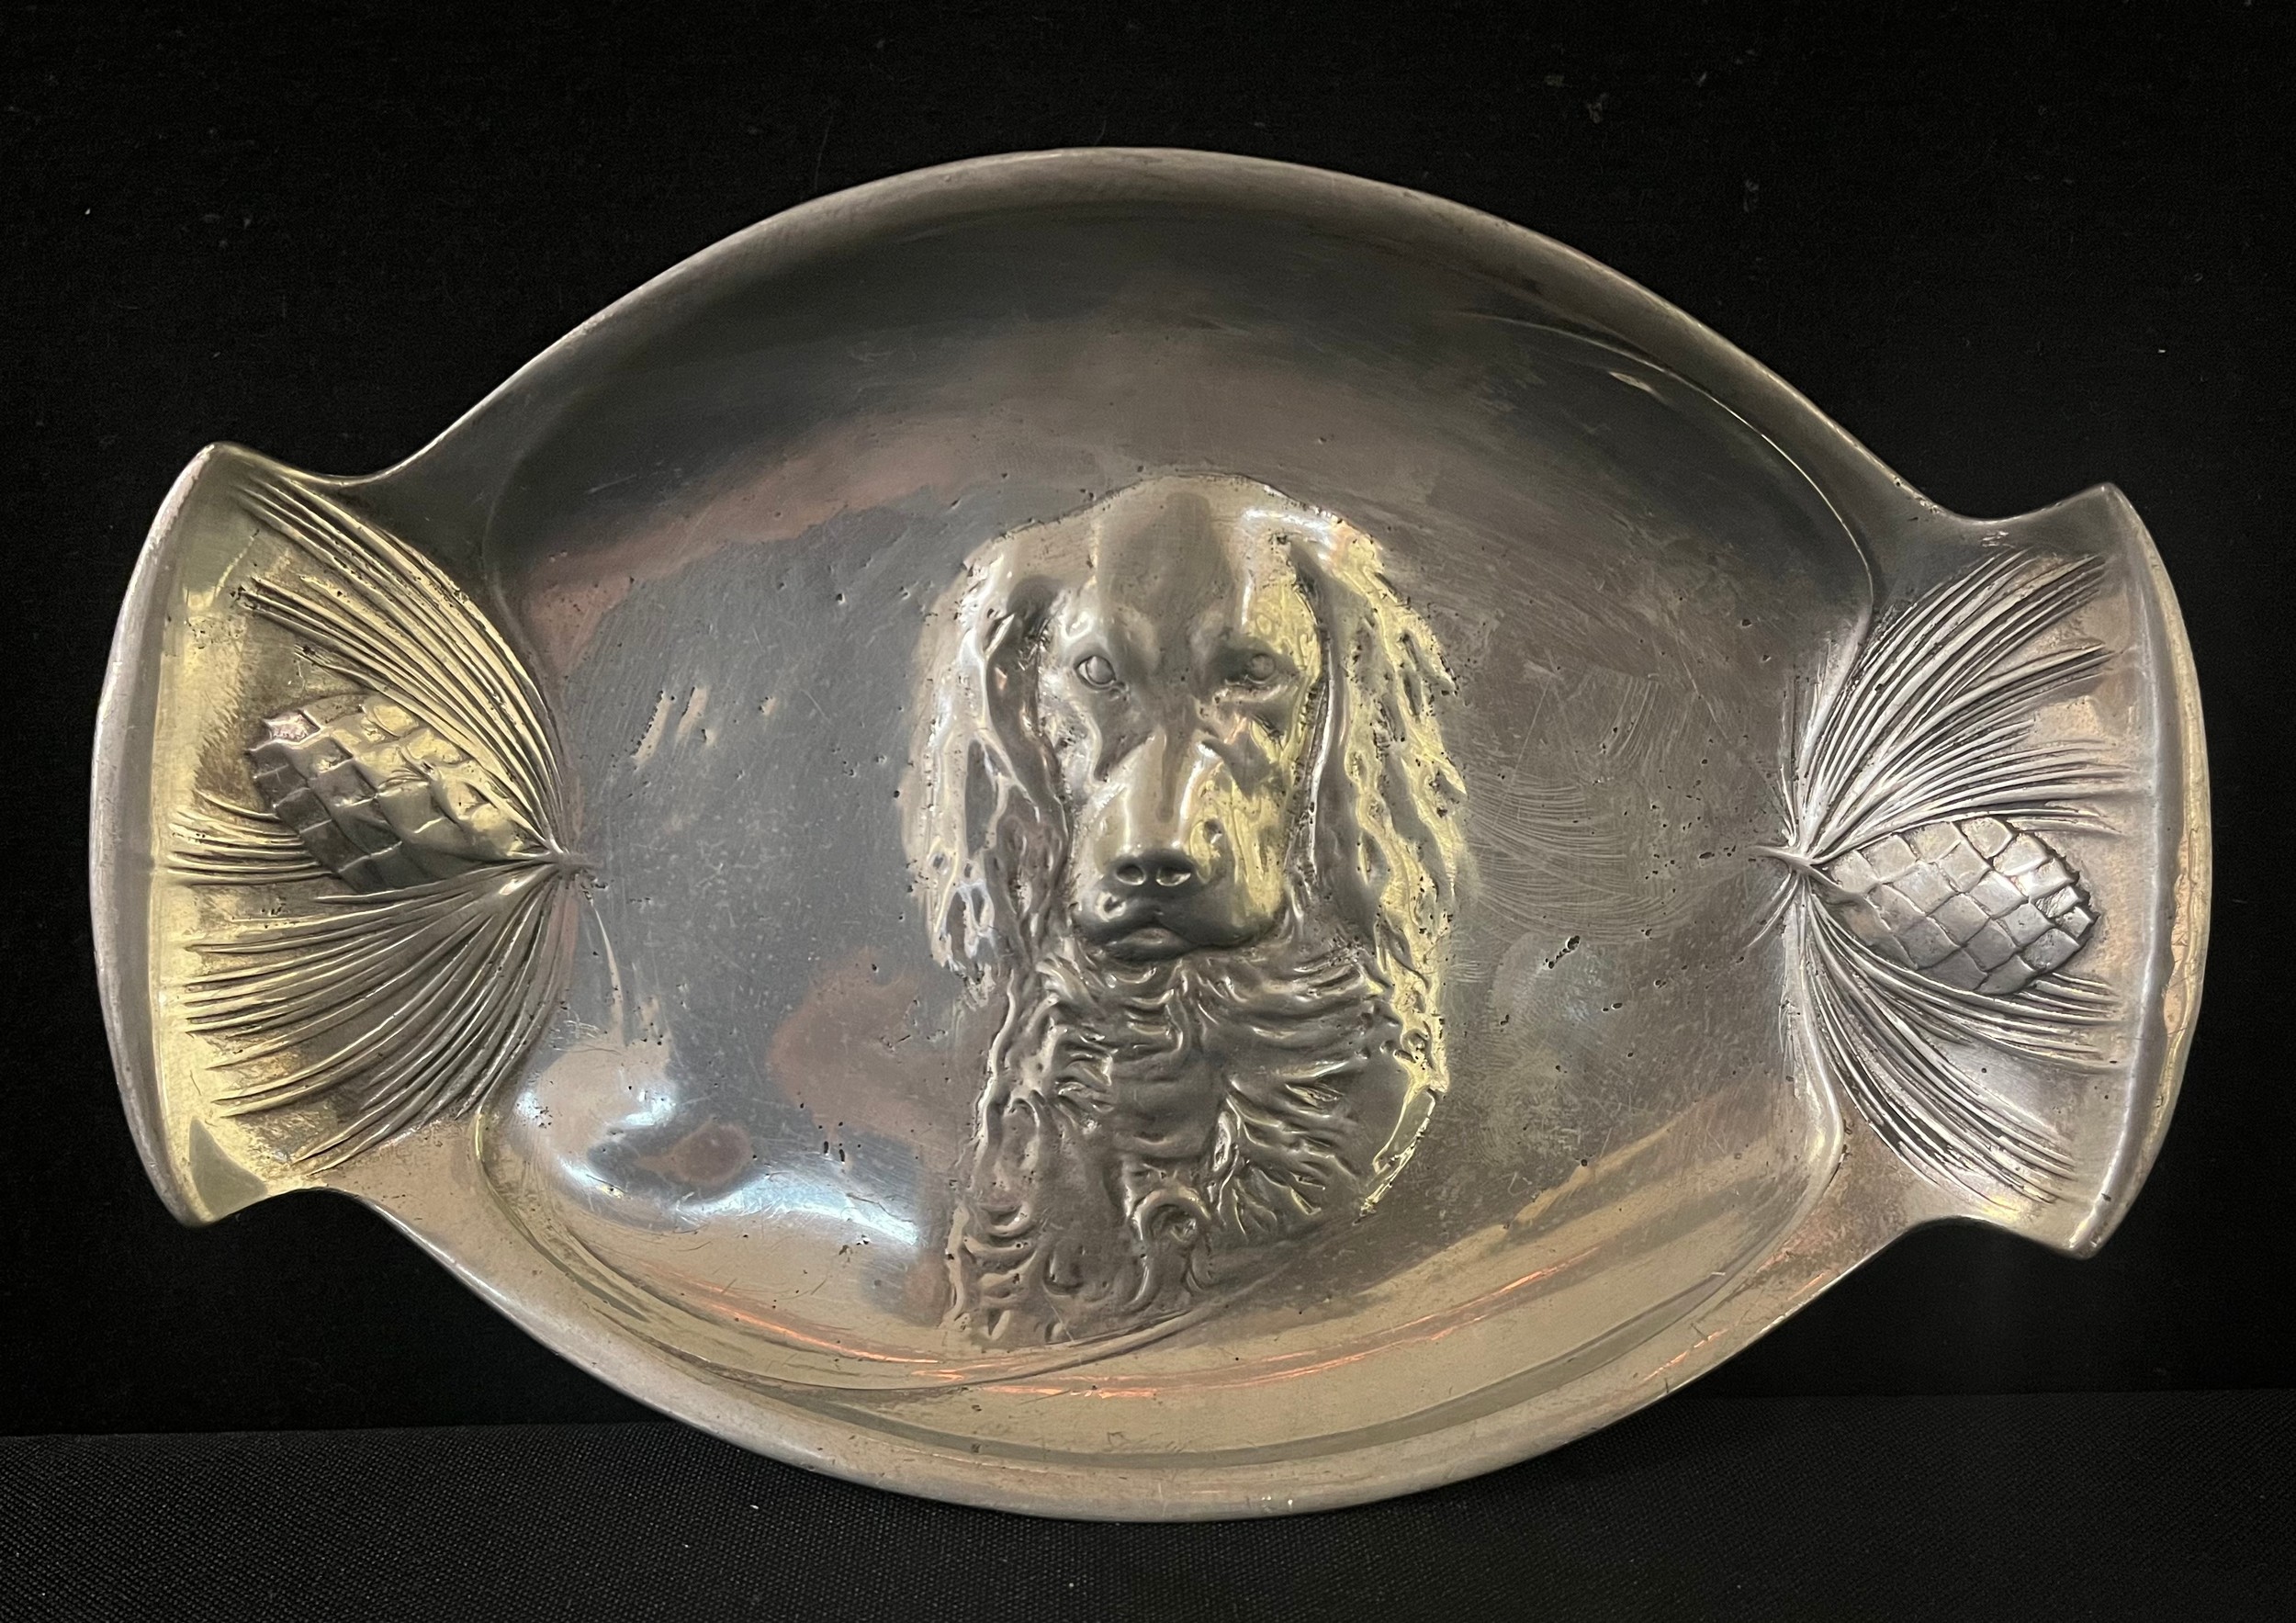 A W.M.F. plated pewter shaped oval dish, embossed with a Retriever, the handles with pine cones